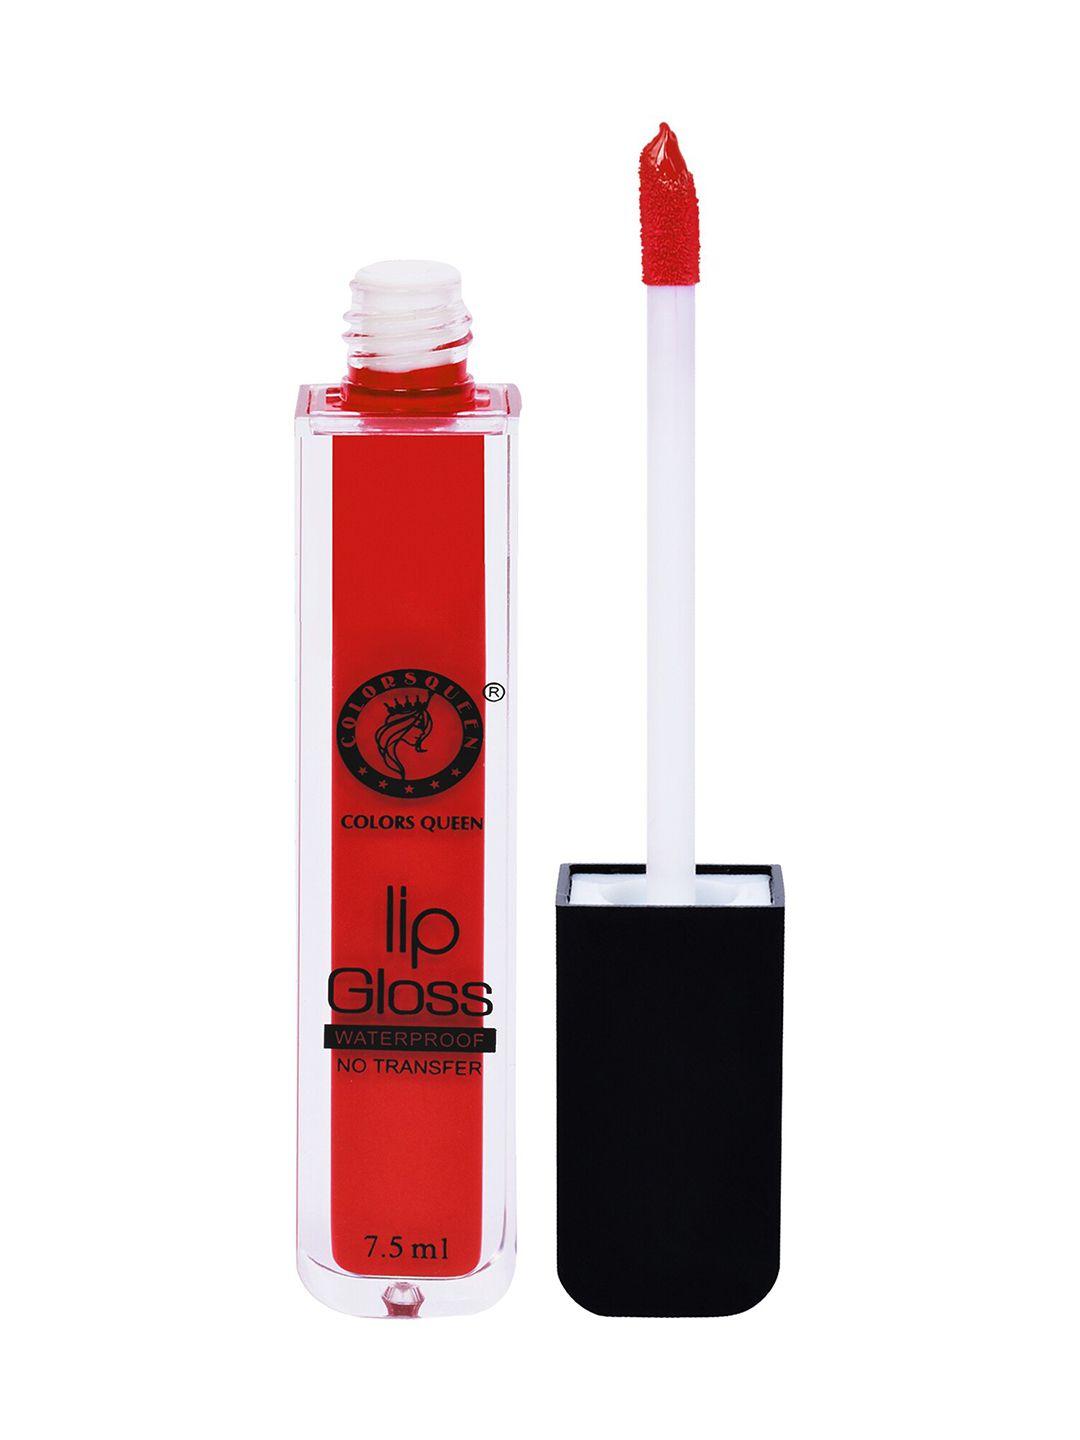 colors queen non transfer water proof lip gloss 7.5 ml - red orange 05